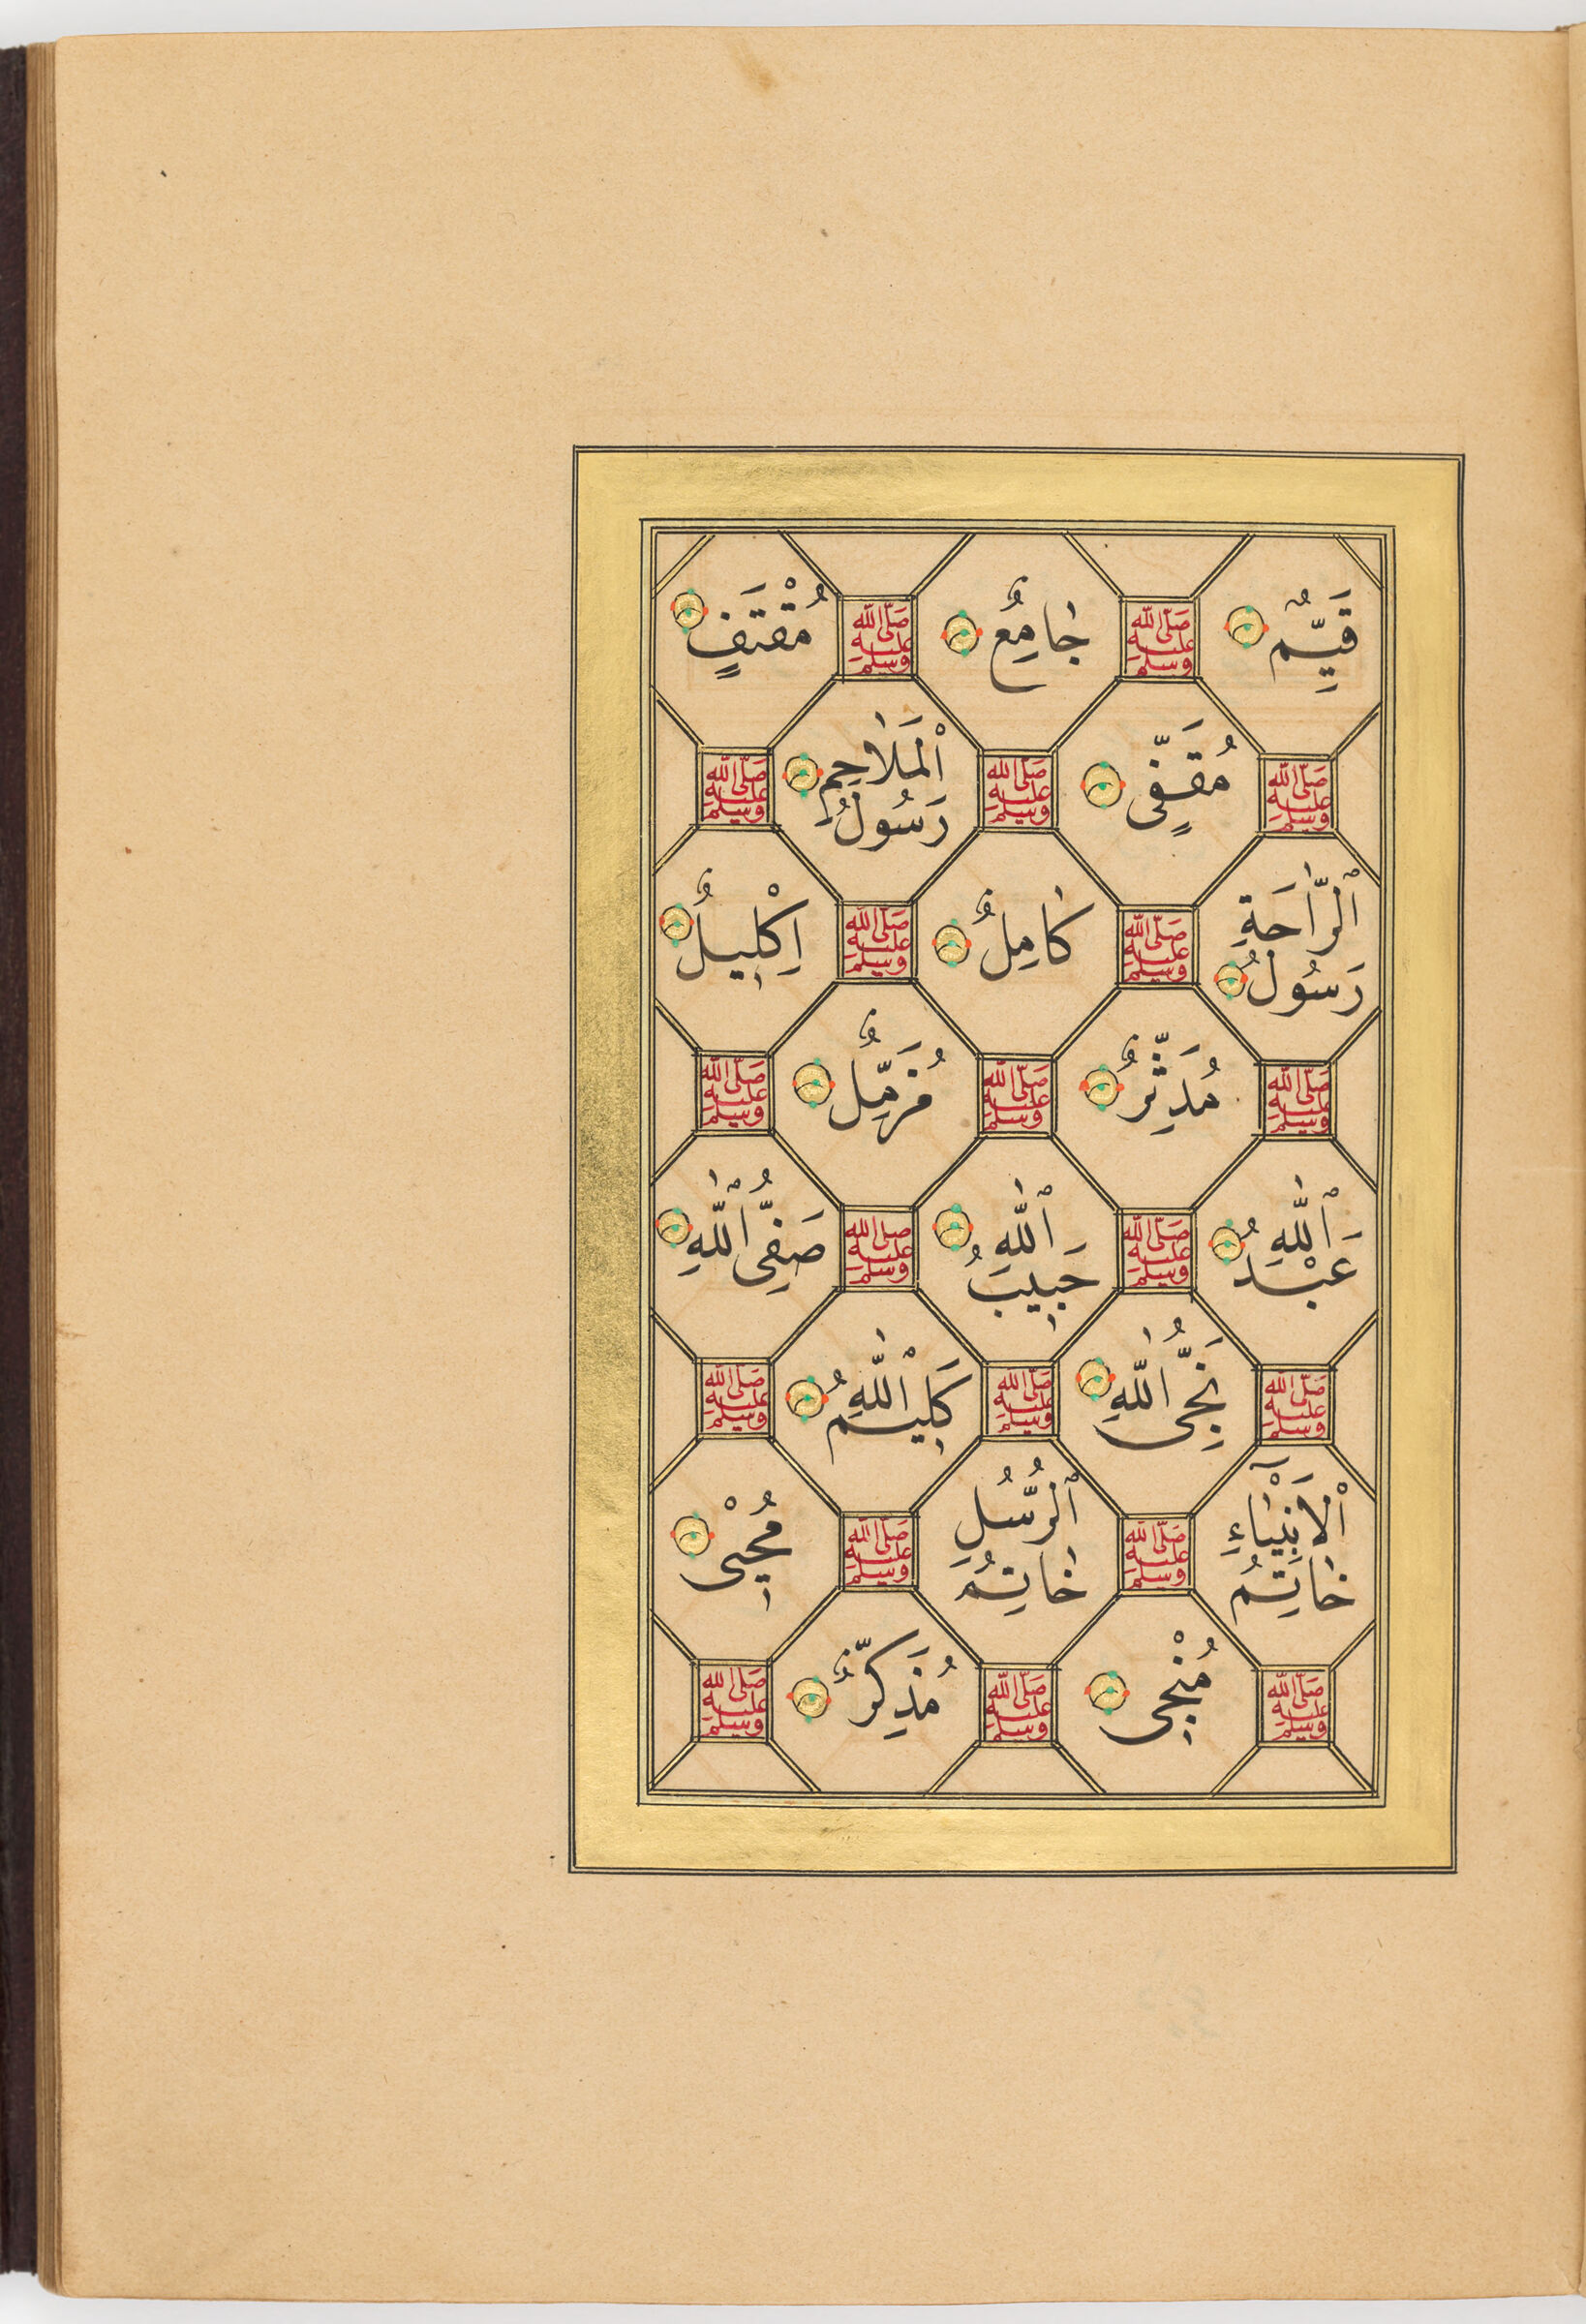 The Prophet’s Names (A Decorated Chart Recto; A Decorated Chart Verso Of Folio 14), From A Manuscript Of Prayer